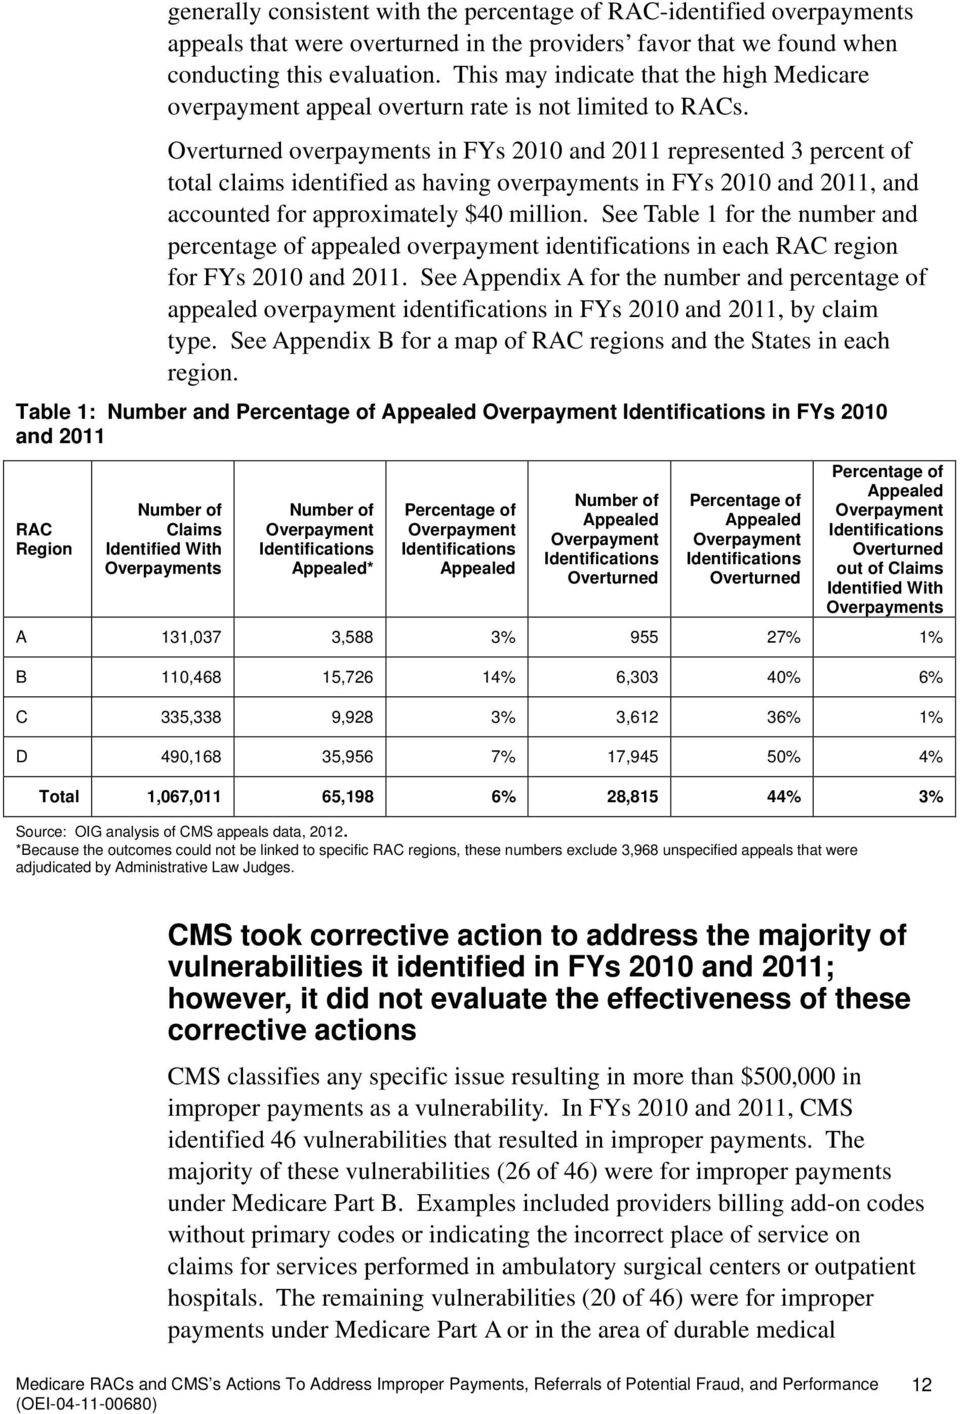 Overturned overpayments in FYs 2010 and 2011 represented 3 percent of total claims identified as having overpayments in FYs 2010 and 2011, and accounted for approximately $40 million.